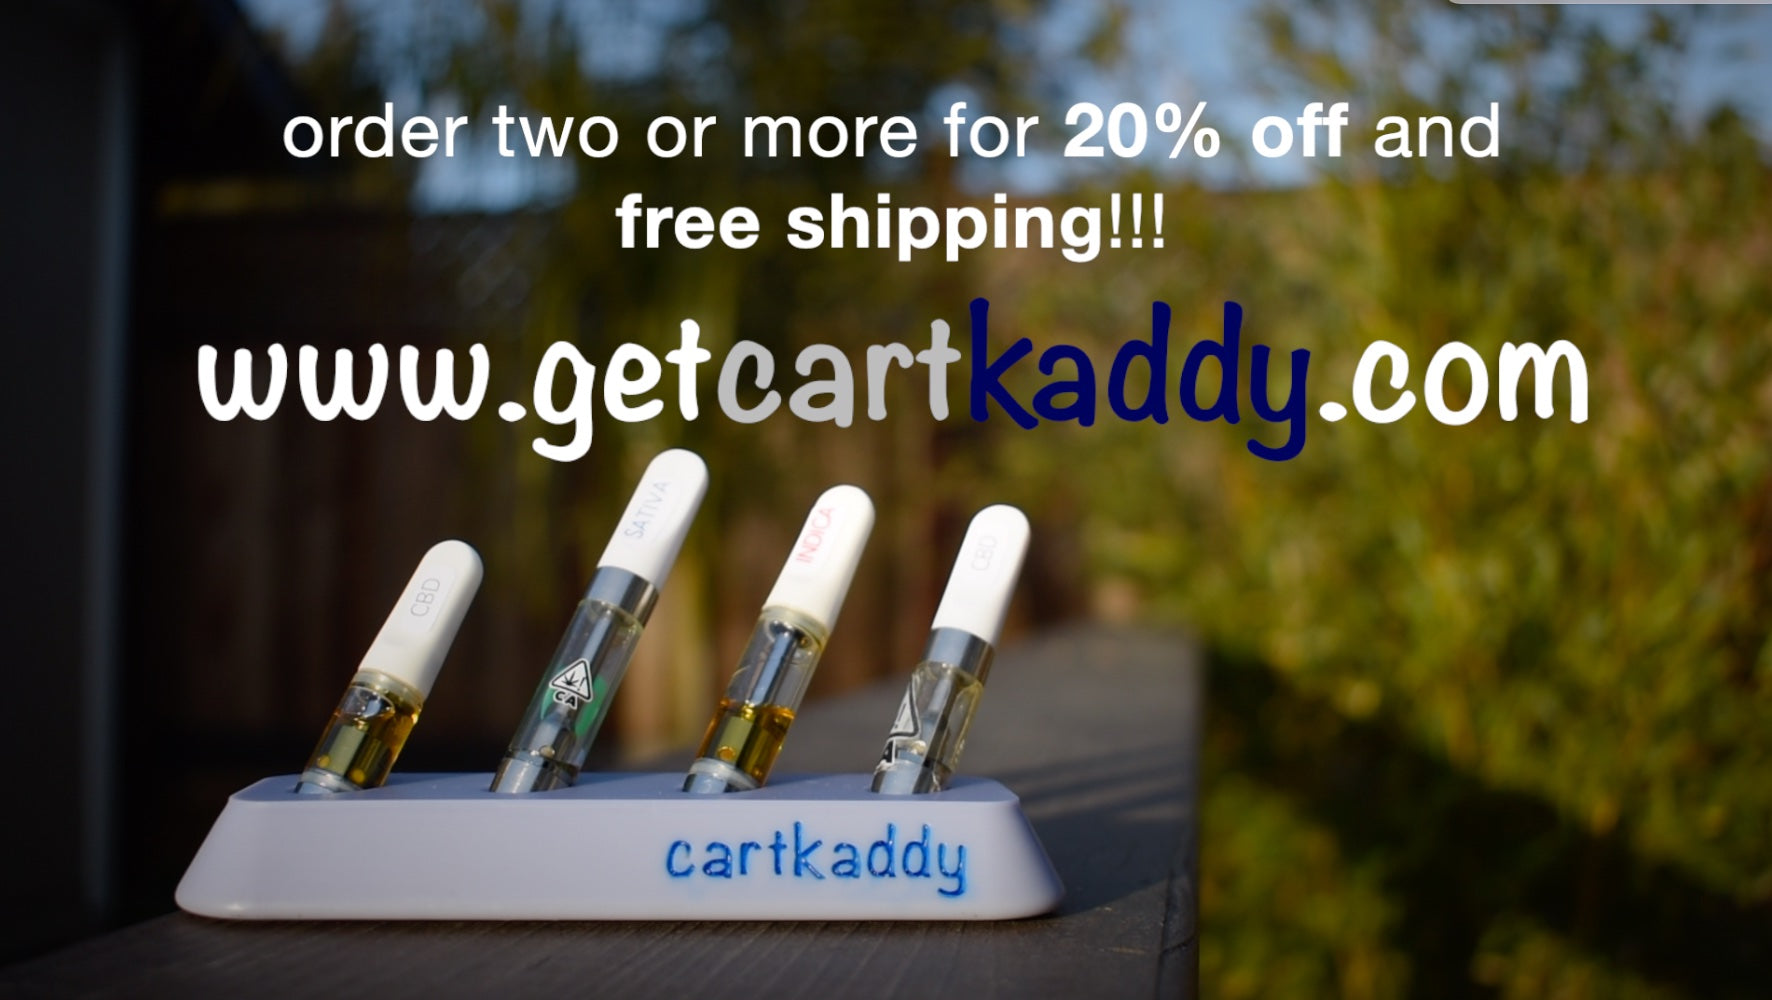 Load video: CartKaddy video offering 20%off and free shipping for orders of two or more